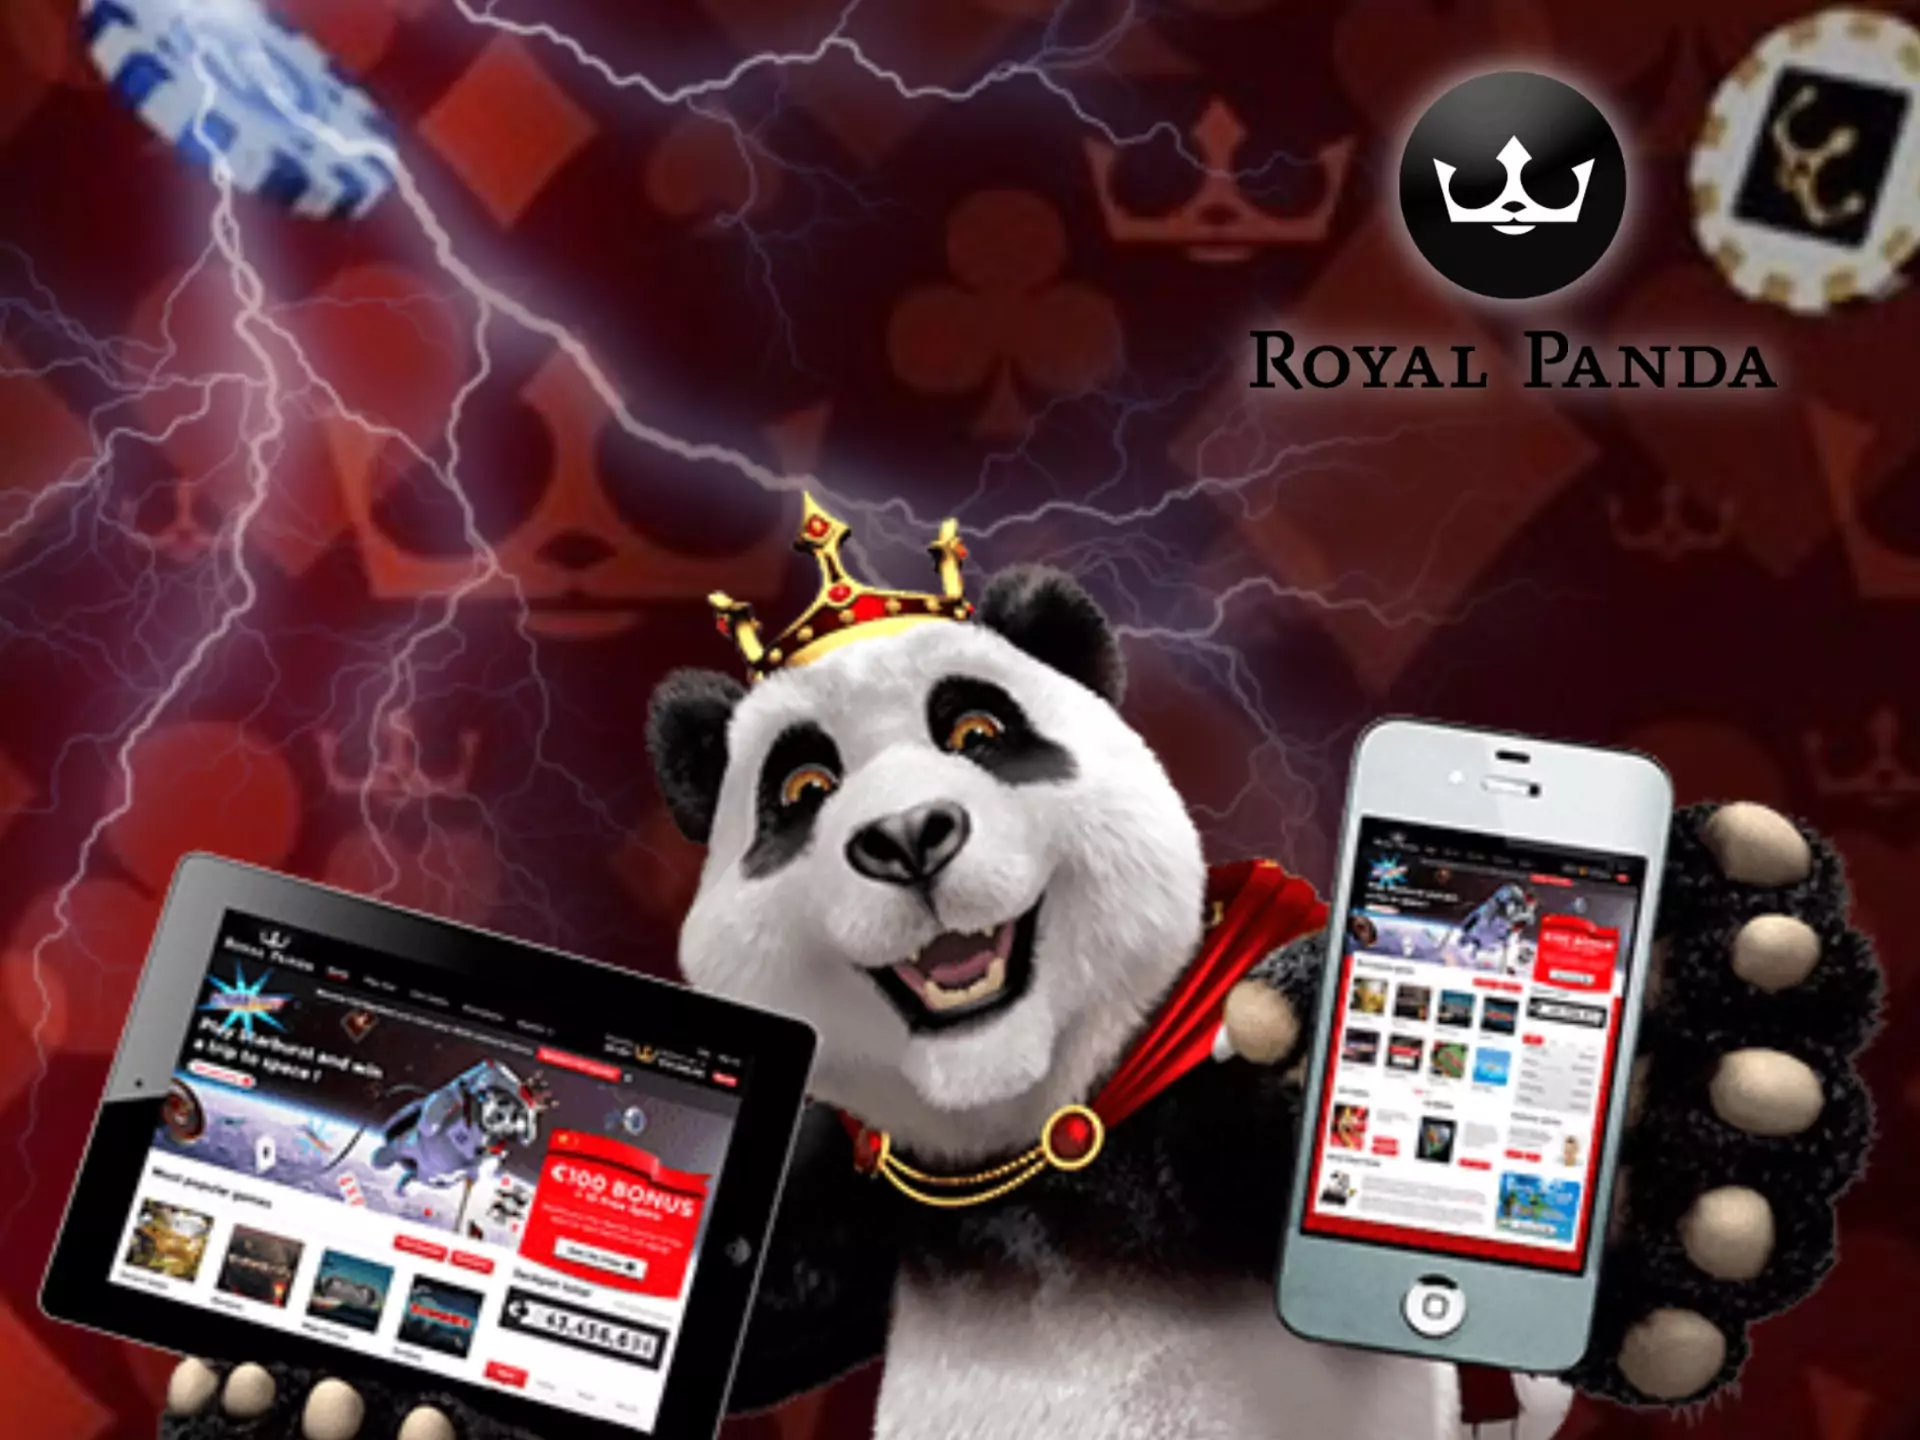 Royal Panda mobile app has a user-friendly interface and is easy to use.